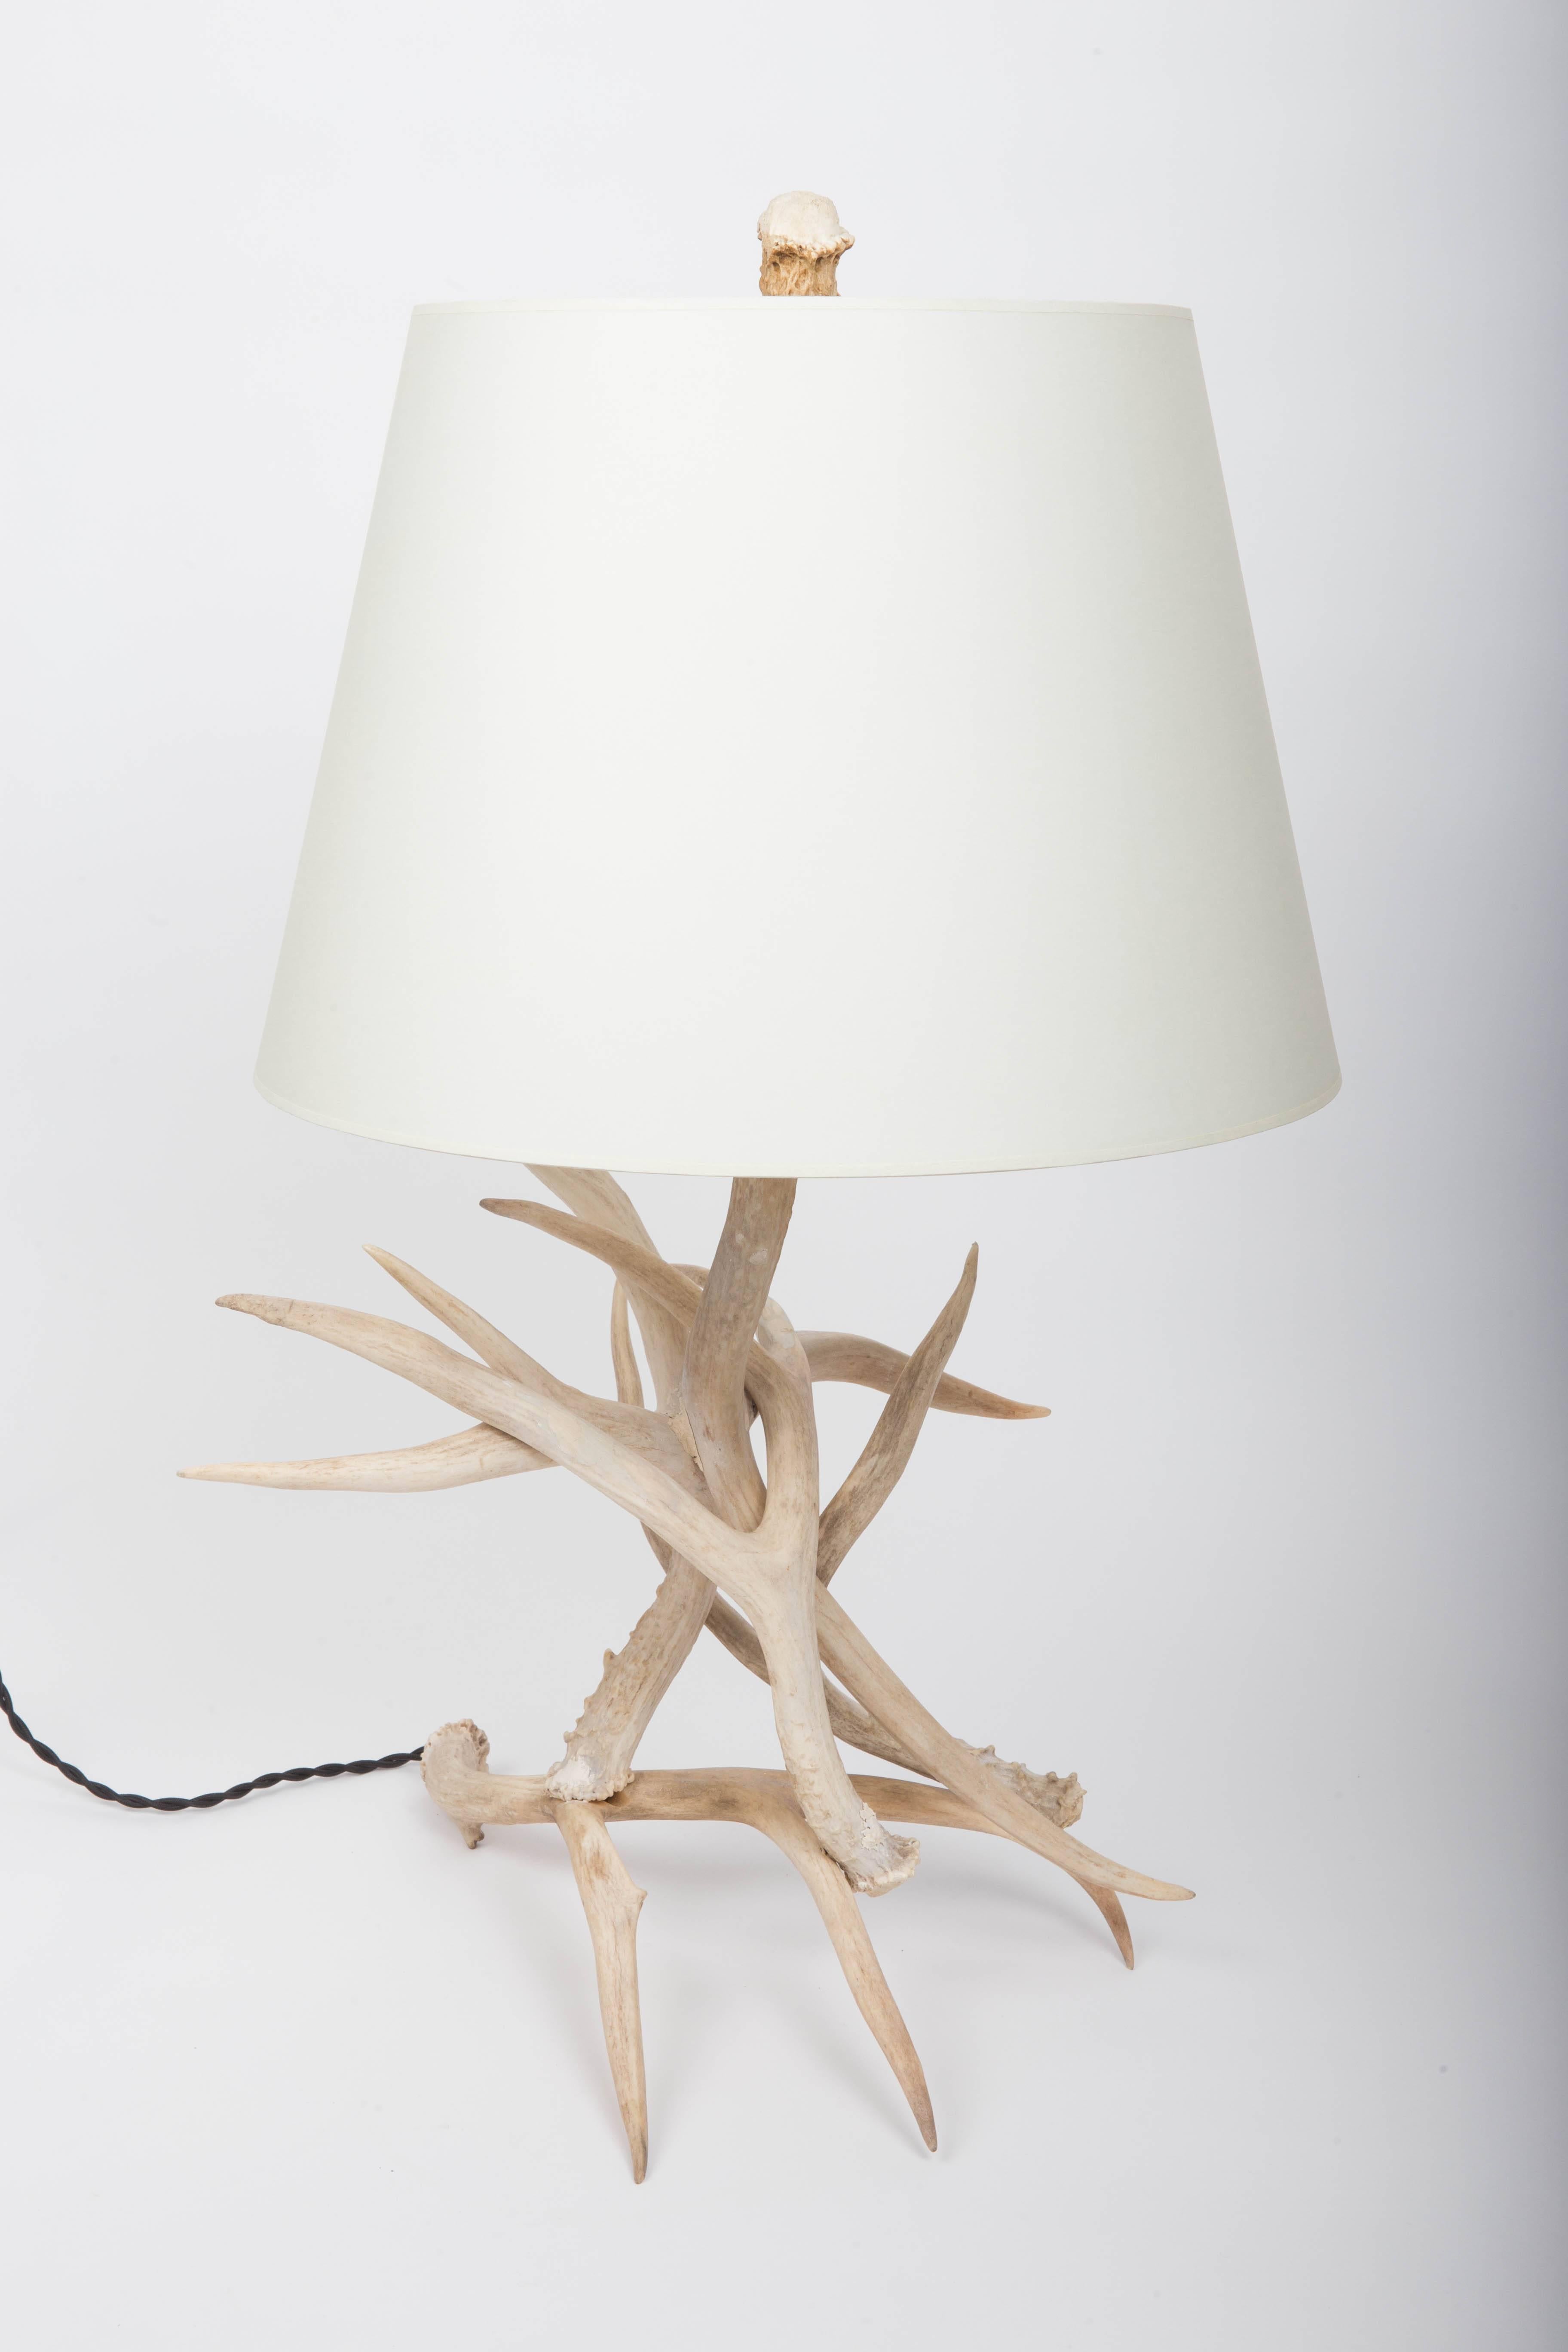 Antler table lamp, 20th century

Shade not included
Newly rewired with black twisted silk cord and bronze finish on fittings.